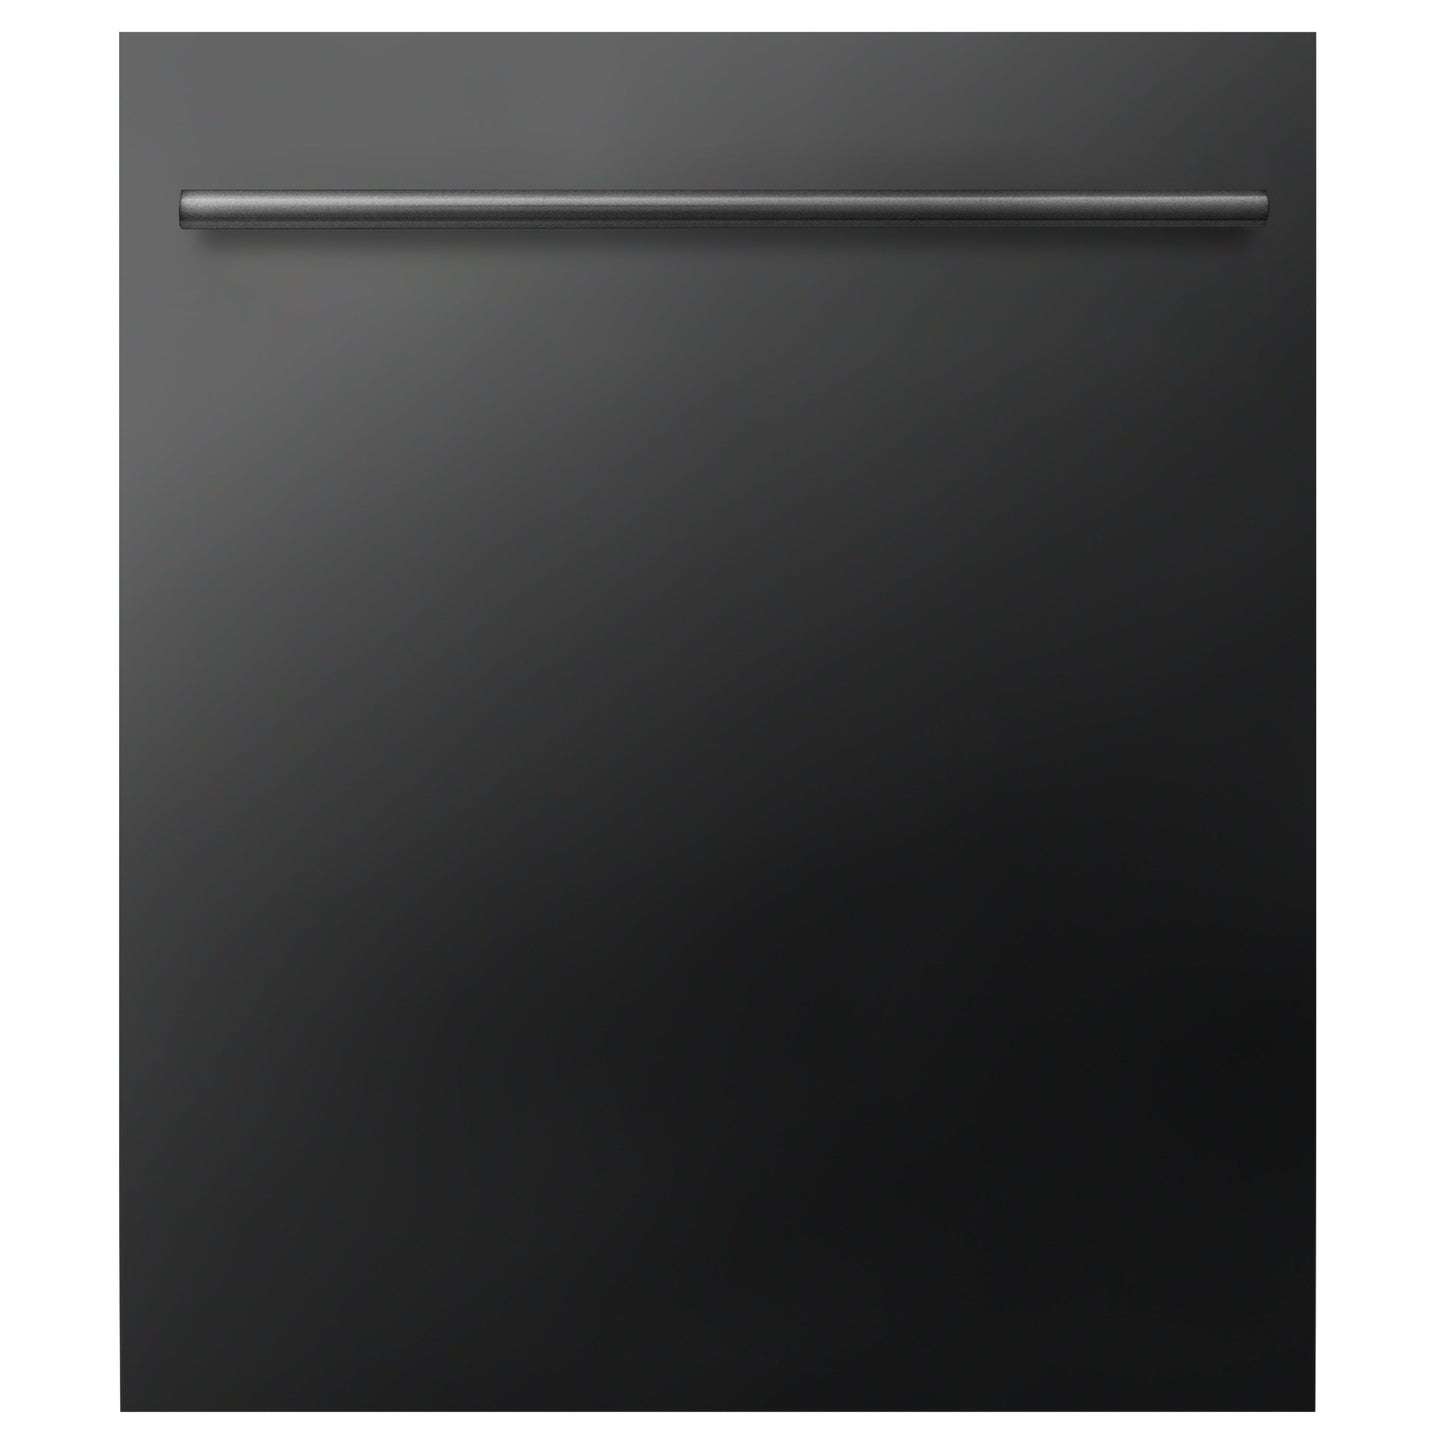 ZLINE 24 in. Top Control Dishwasher in Black Stainless Steel with Modern Style Handle (DW-BS-H-24)